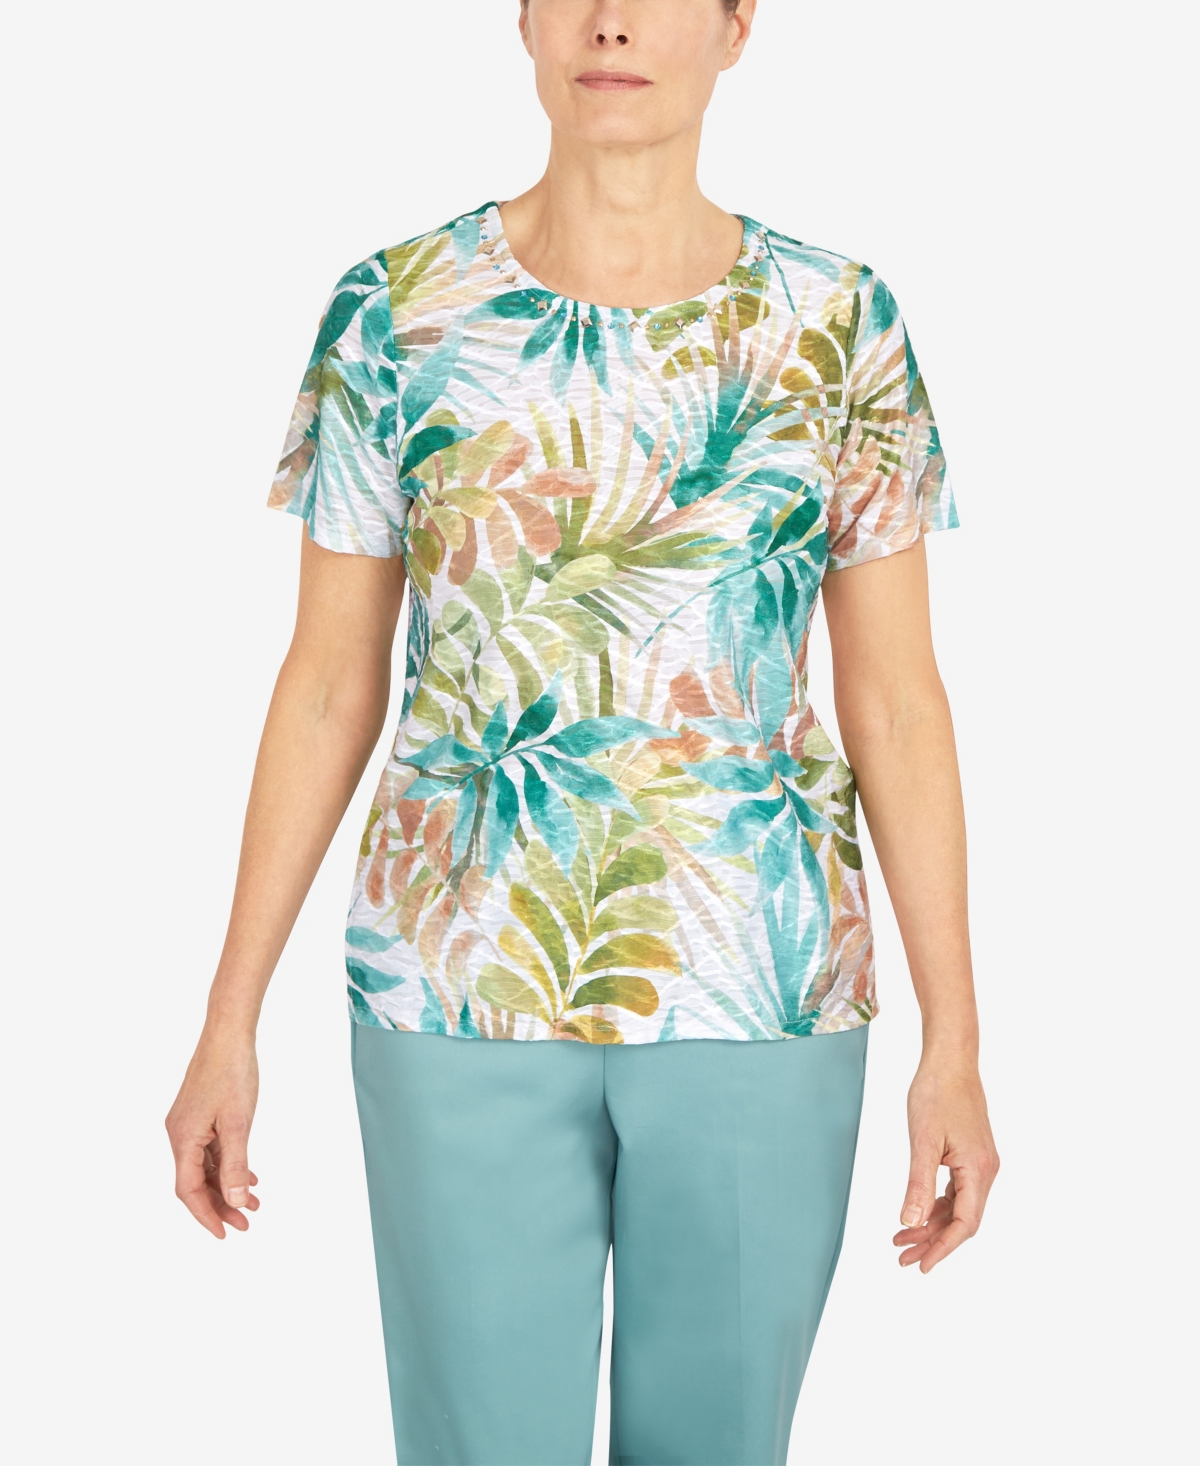 ALFRED DUNNER WOMEN'S COCONUT GROVE TROPICAL LEAVES SHORT SLEEVE TOP